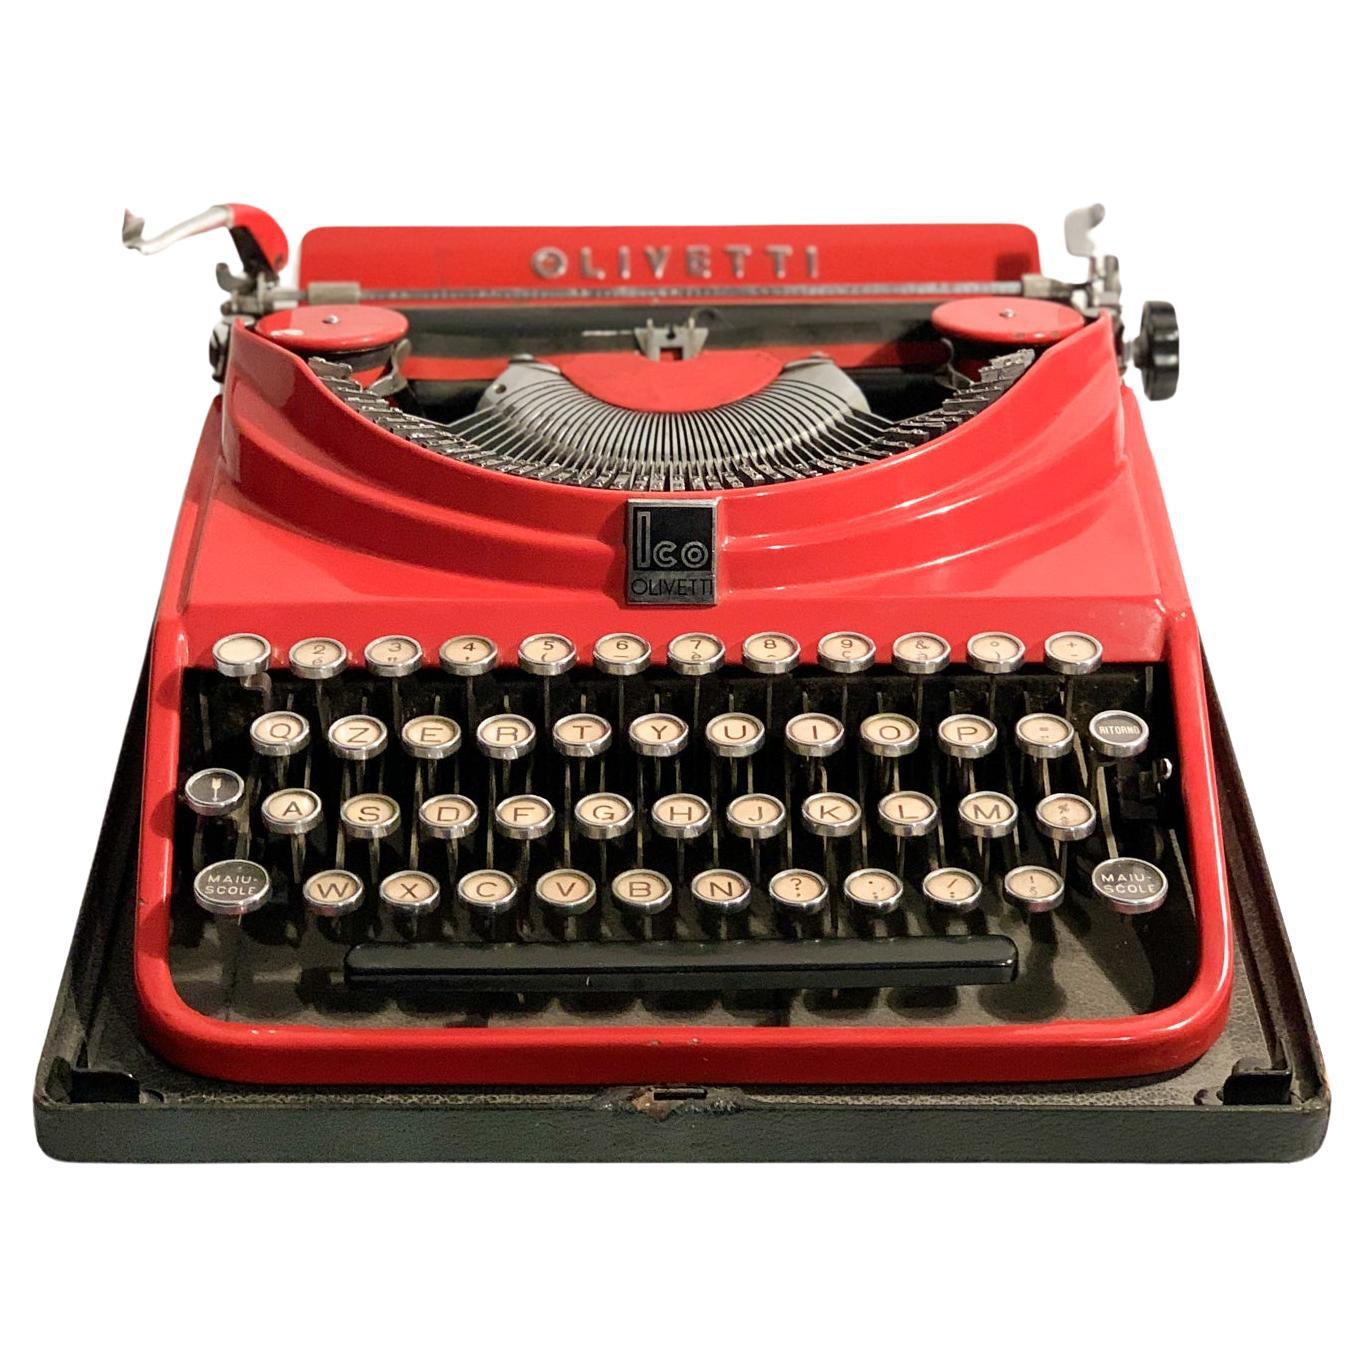 Olivetti Red Portable Typewriter Model ICO from 1932